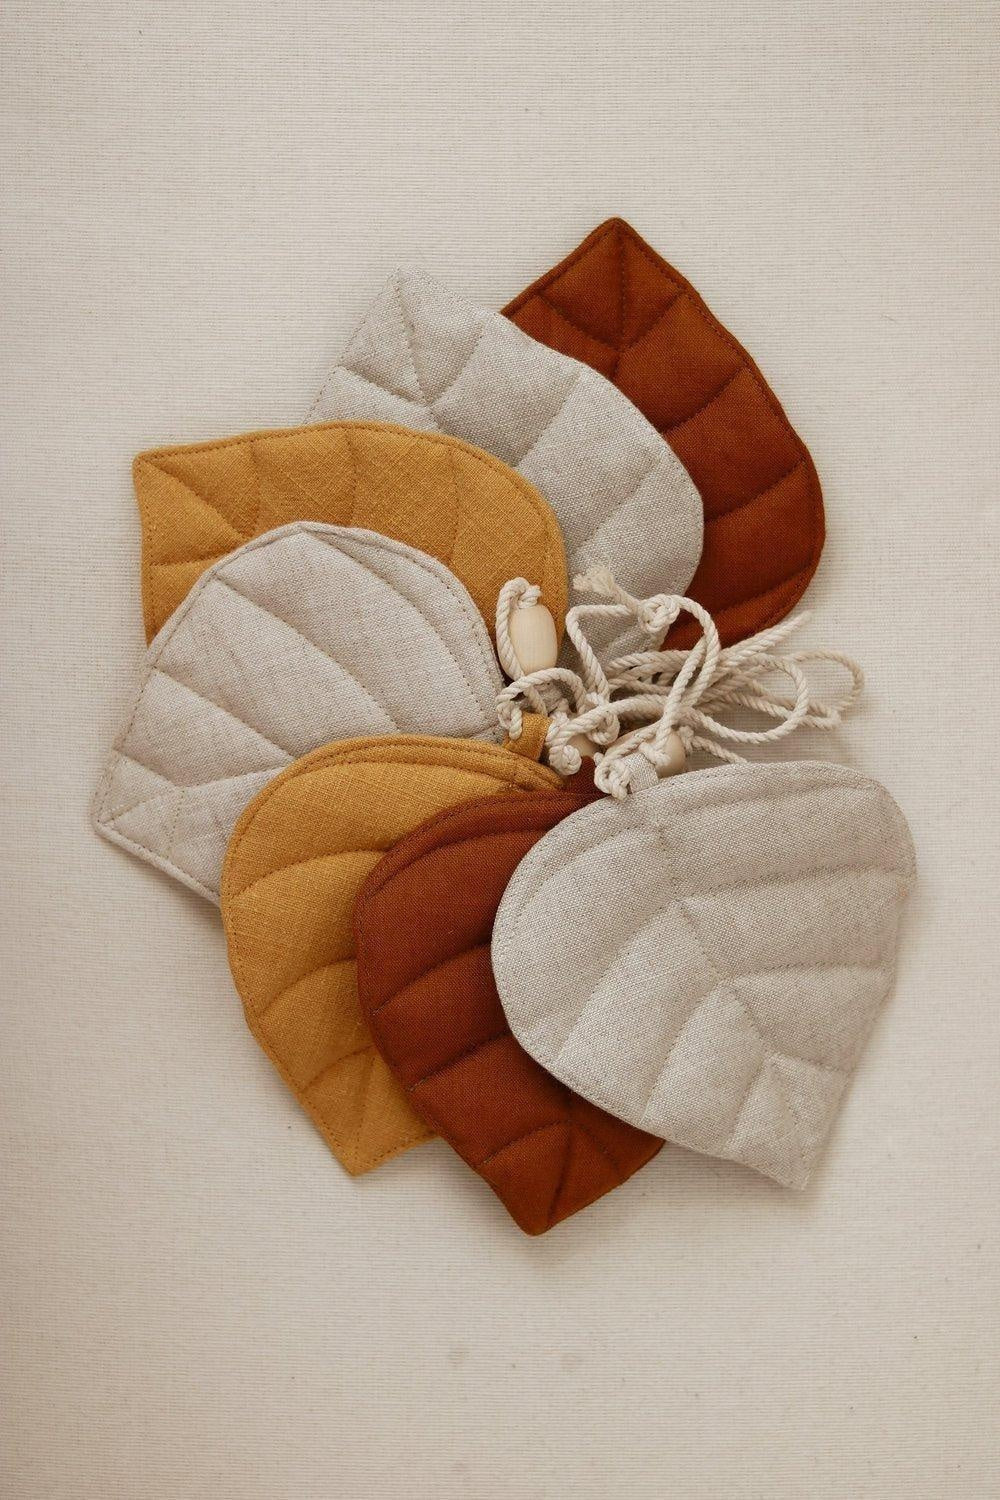 “Ochre” Linen Garland with Leaves